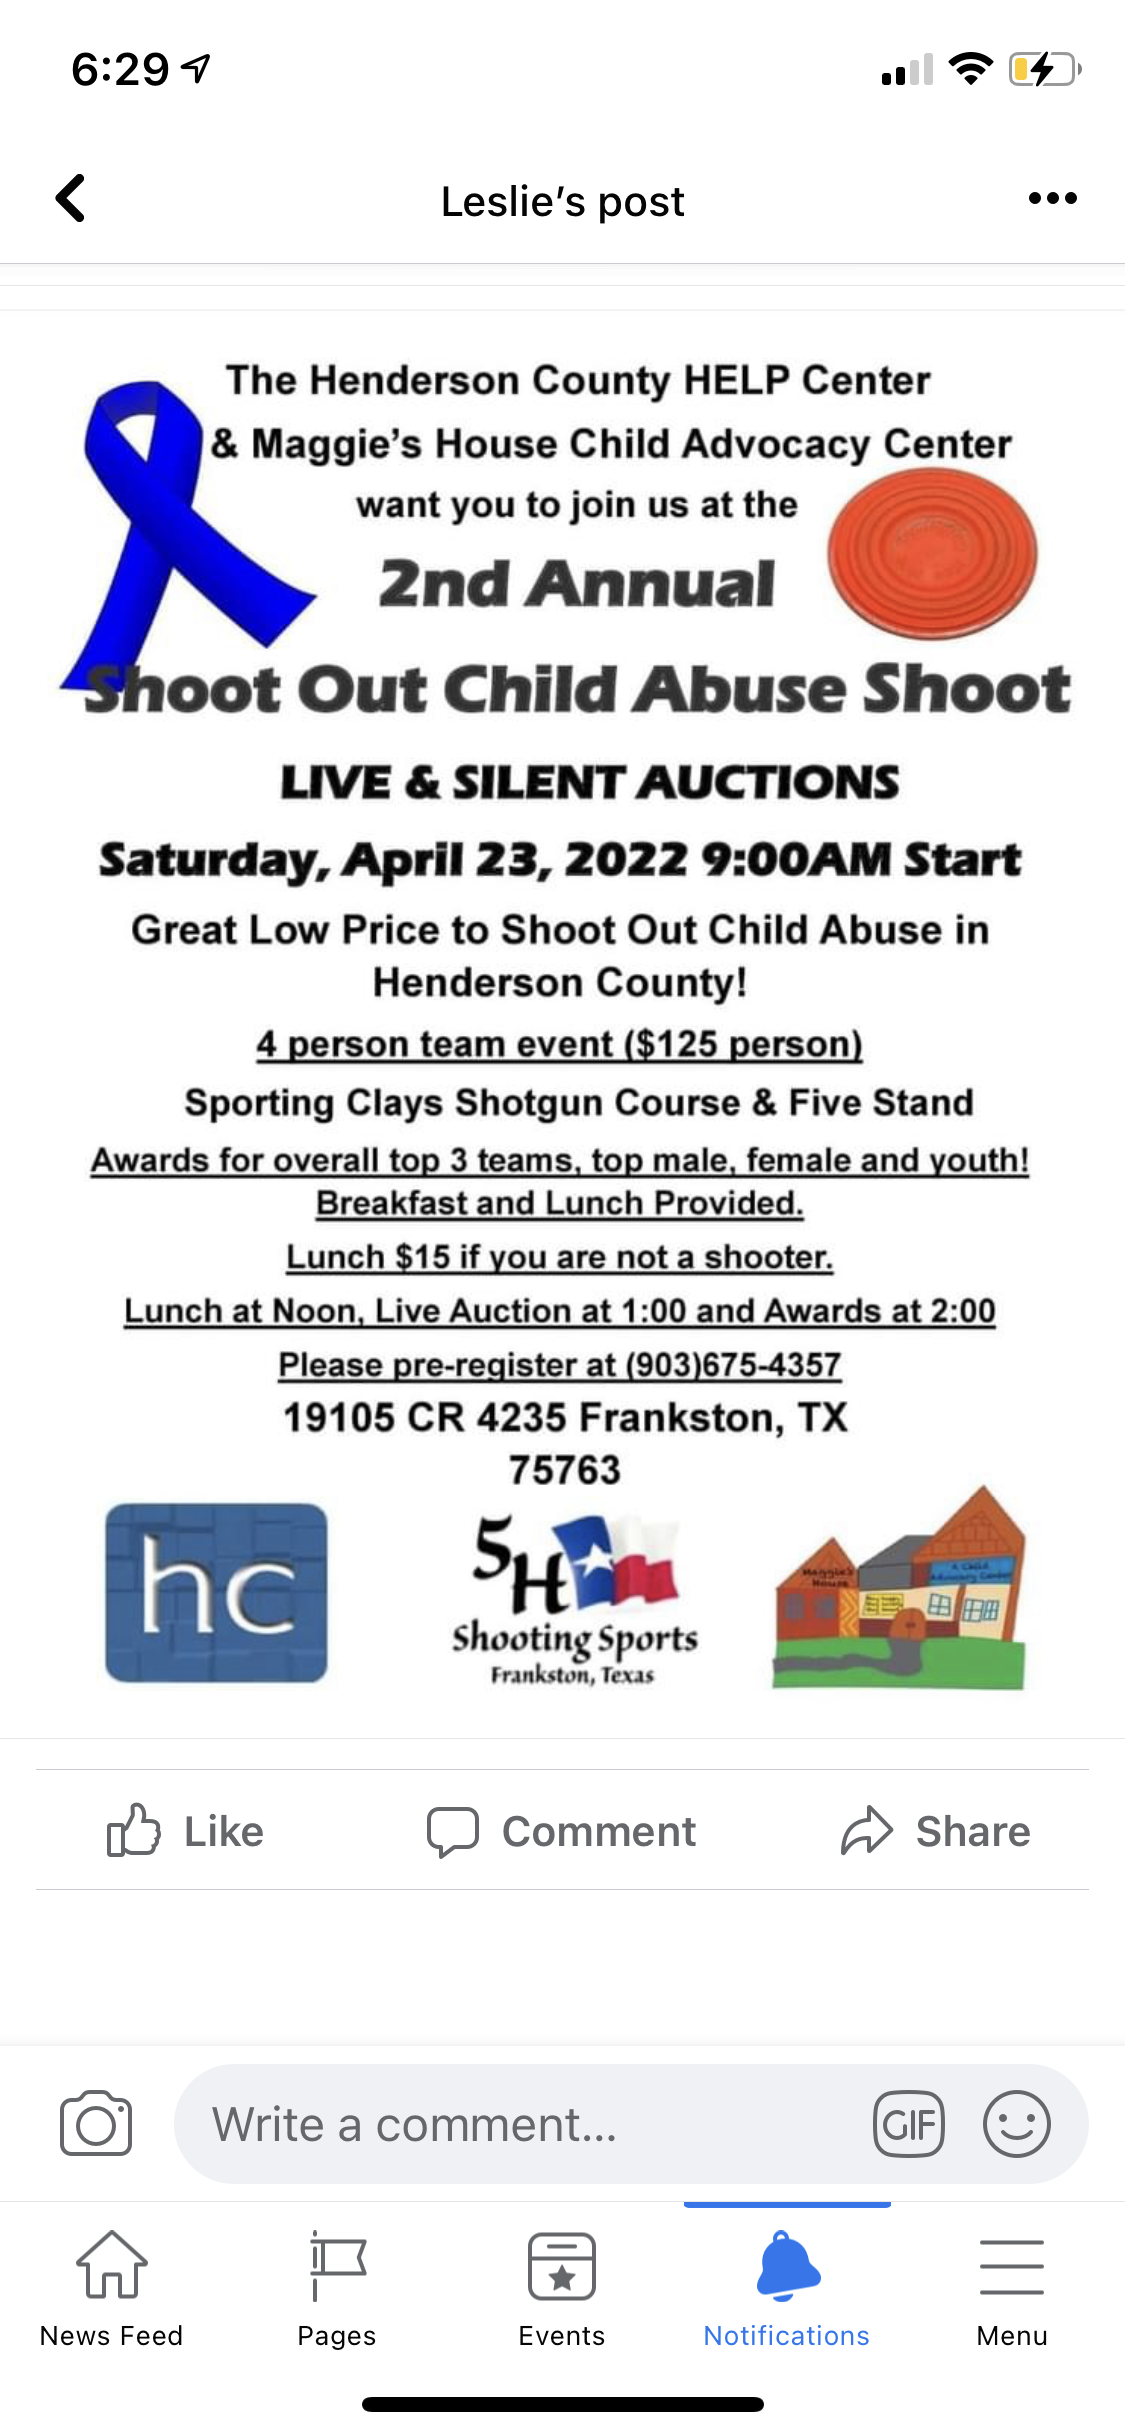 Shoot Out Child Abuse Live & Silent Auction 1 shoot out CedarCreekLake.Online